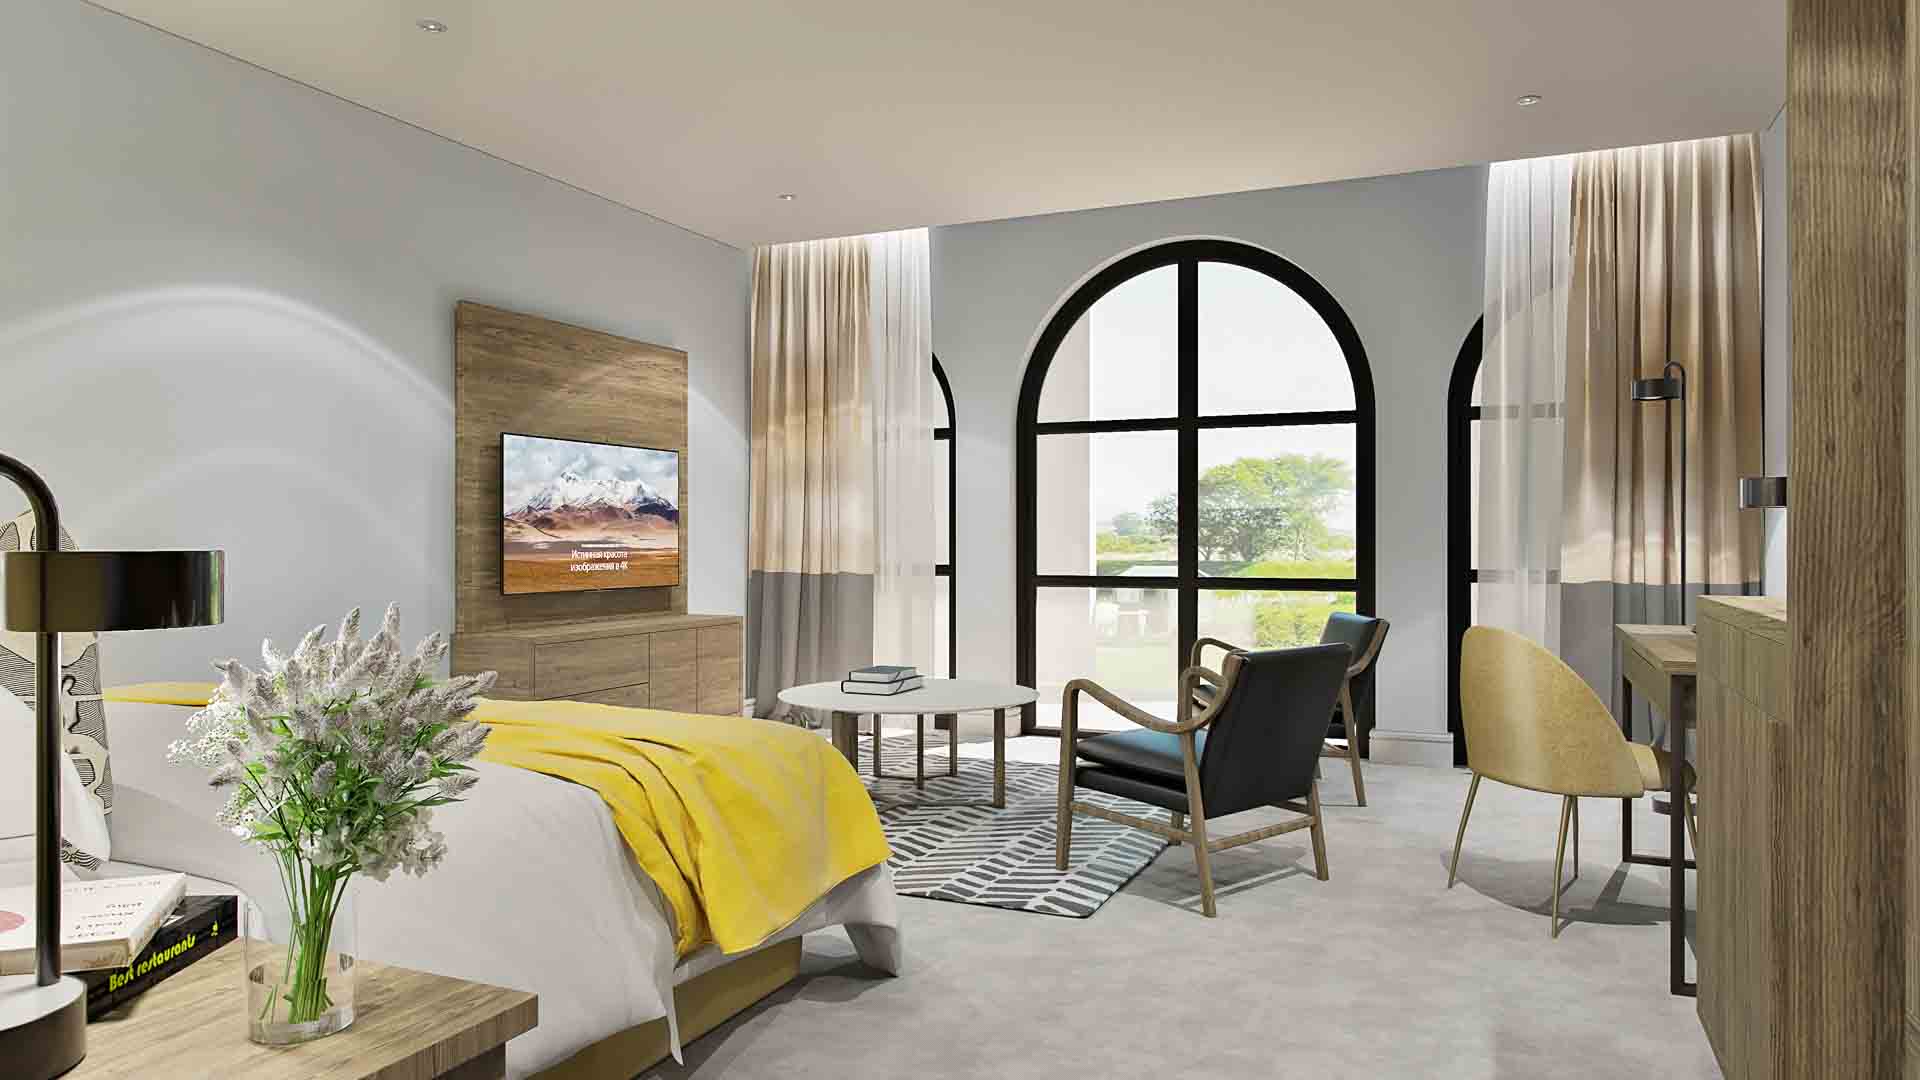 A render of a bedroom at Hazendal Hotel – one of the new African lodges set to open in 2023.